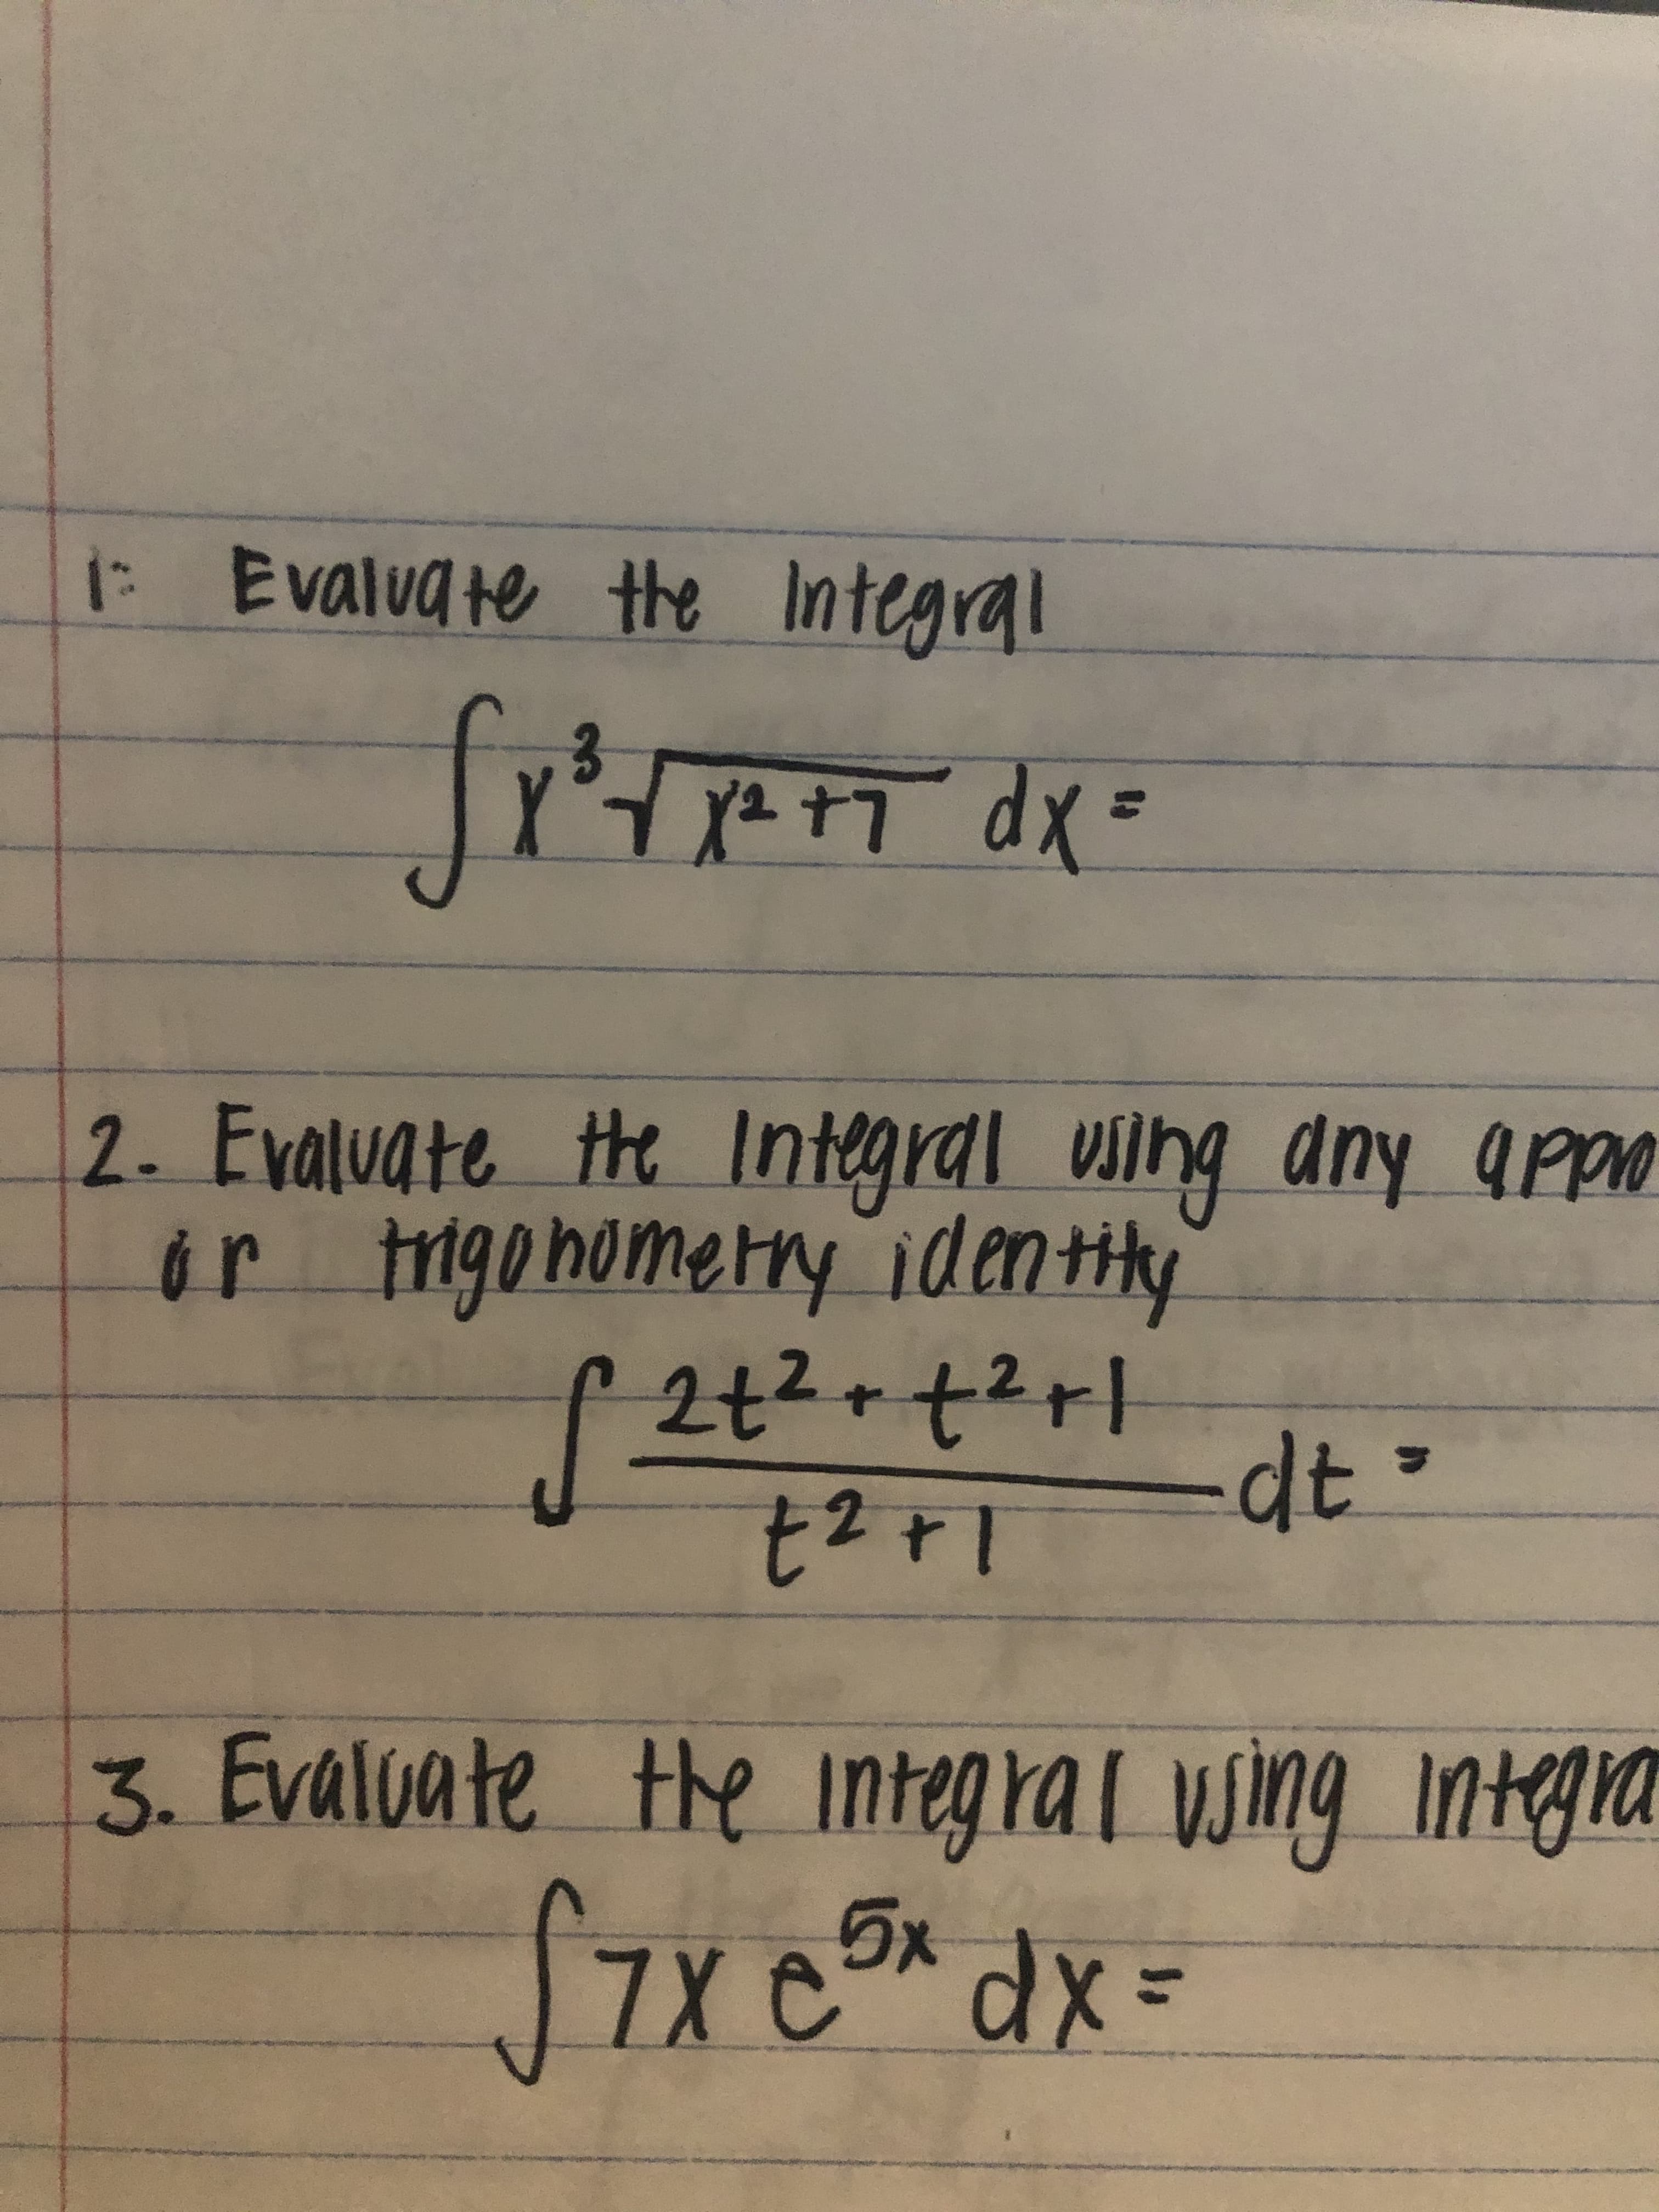 : Evaluate the Integral
x2+7 dx =
